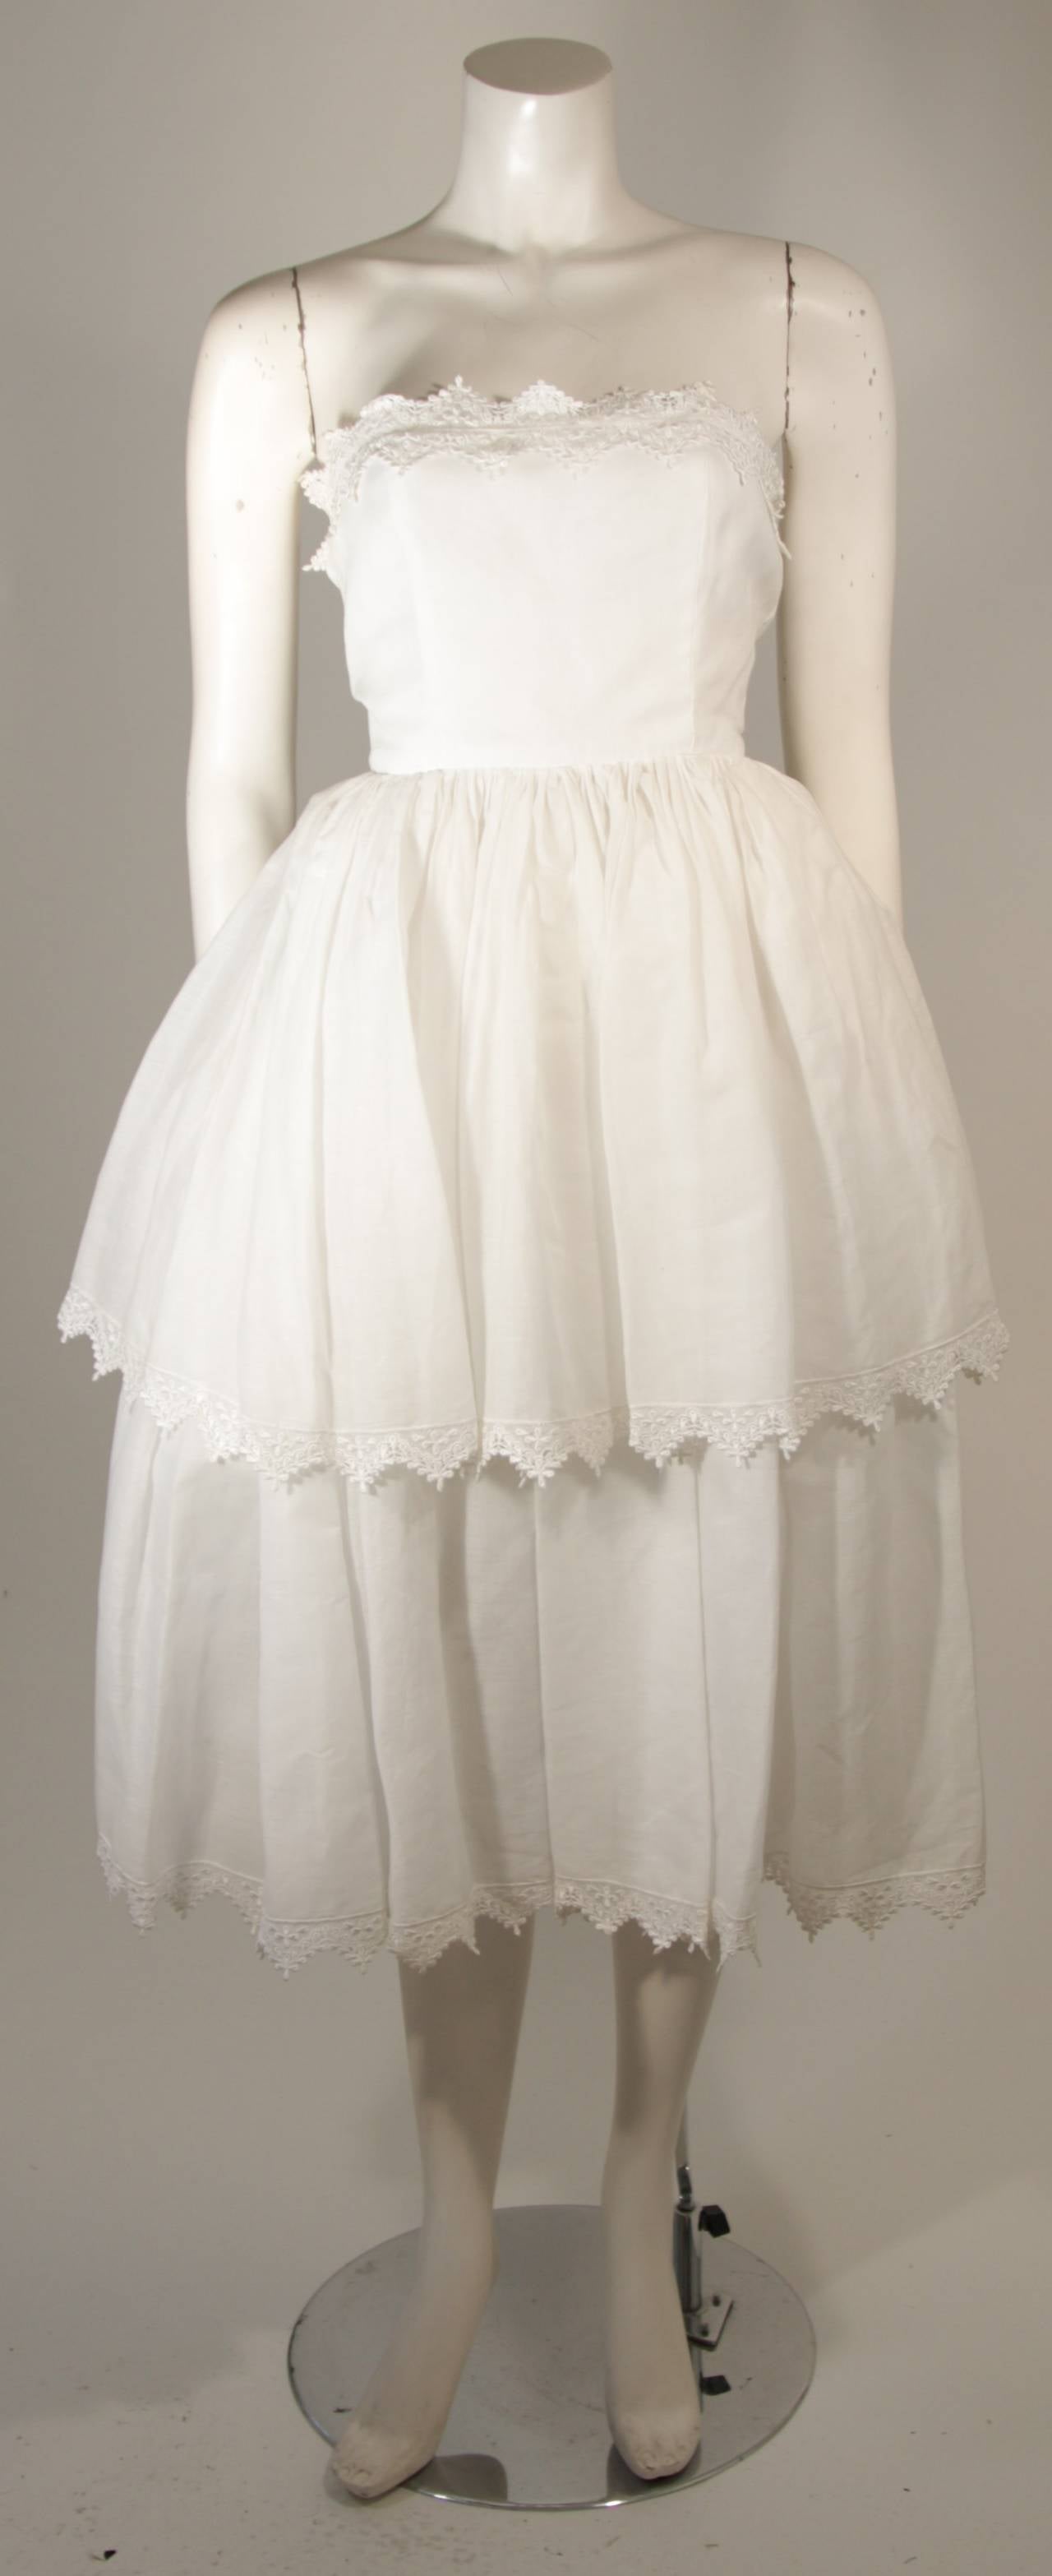 Albert Capraro White Cotton Tiered Dress with Scalloped Lace Edges Size 6 For Sale 2